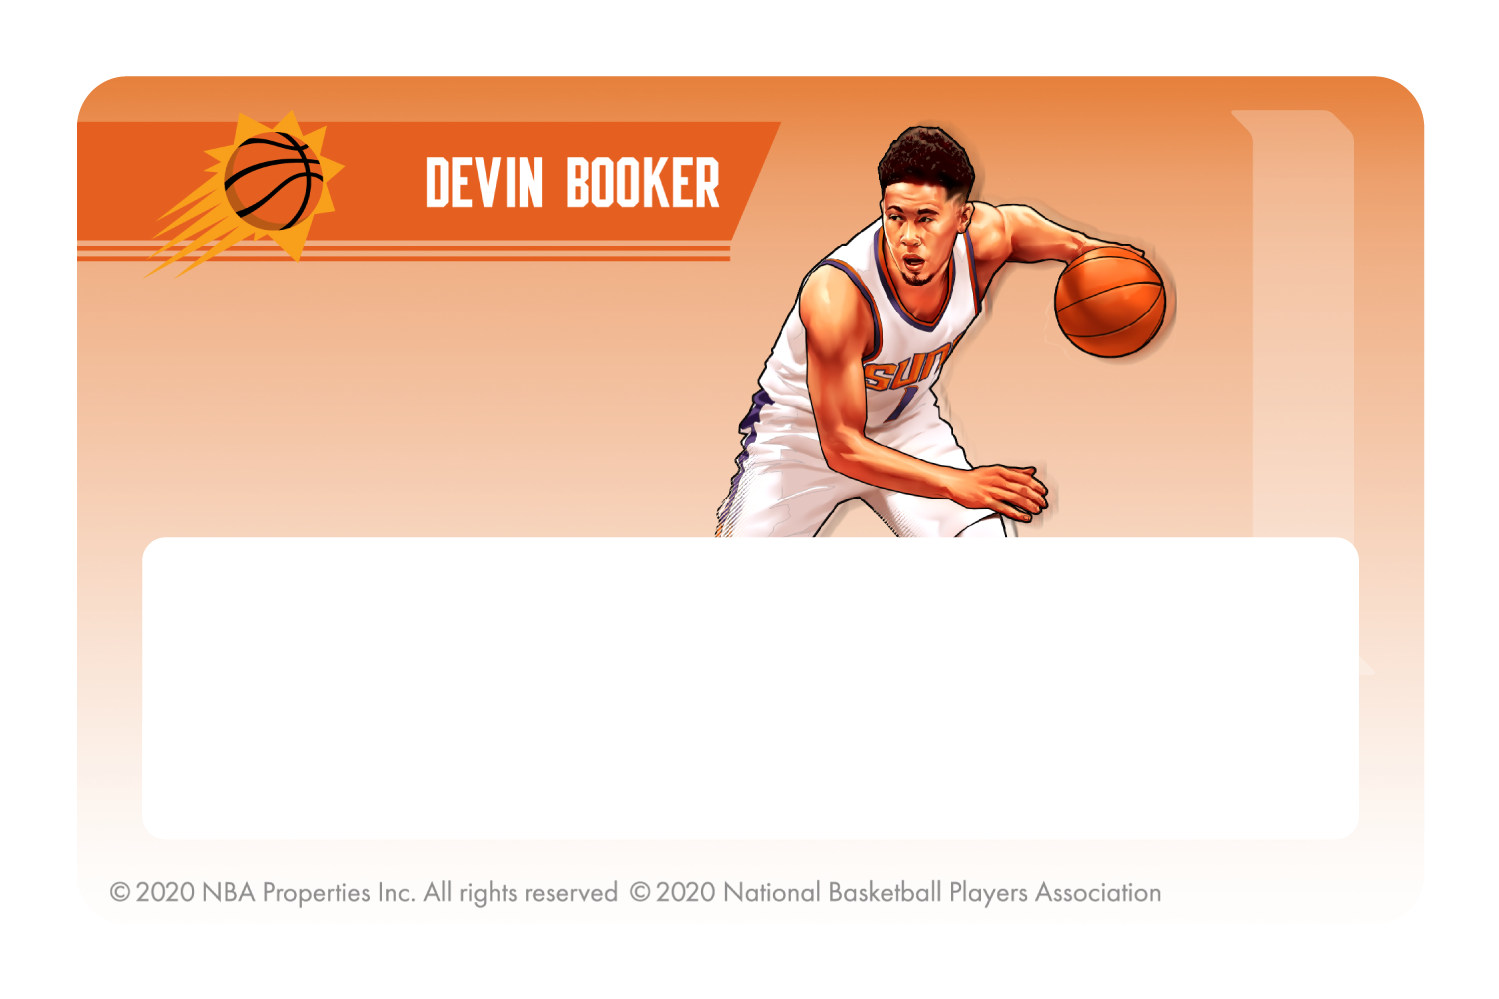 Credit Debit Card Skins | Cucu Covers - Customize Any Bank Card - Phoenix Suns: Devin Booker, Full Cover / Small Chip